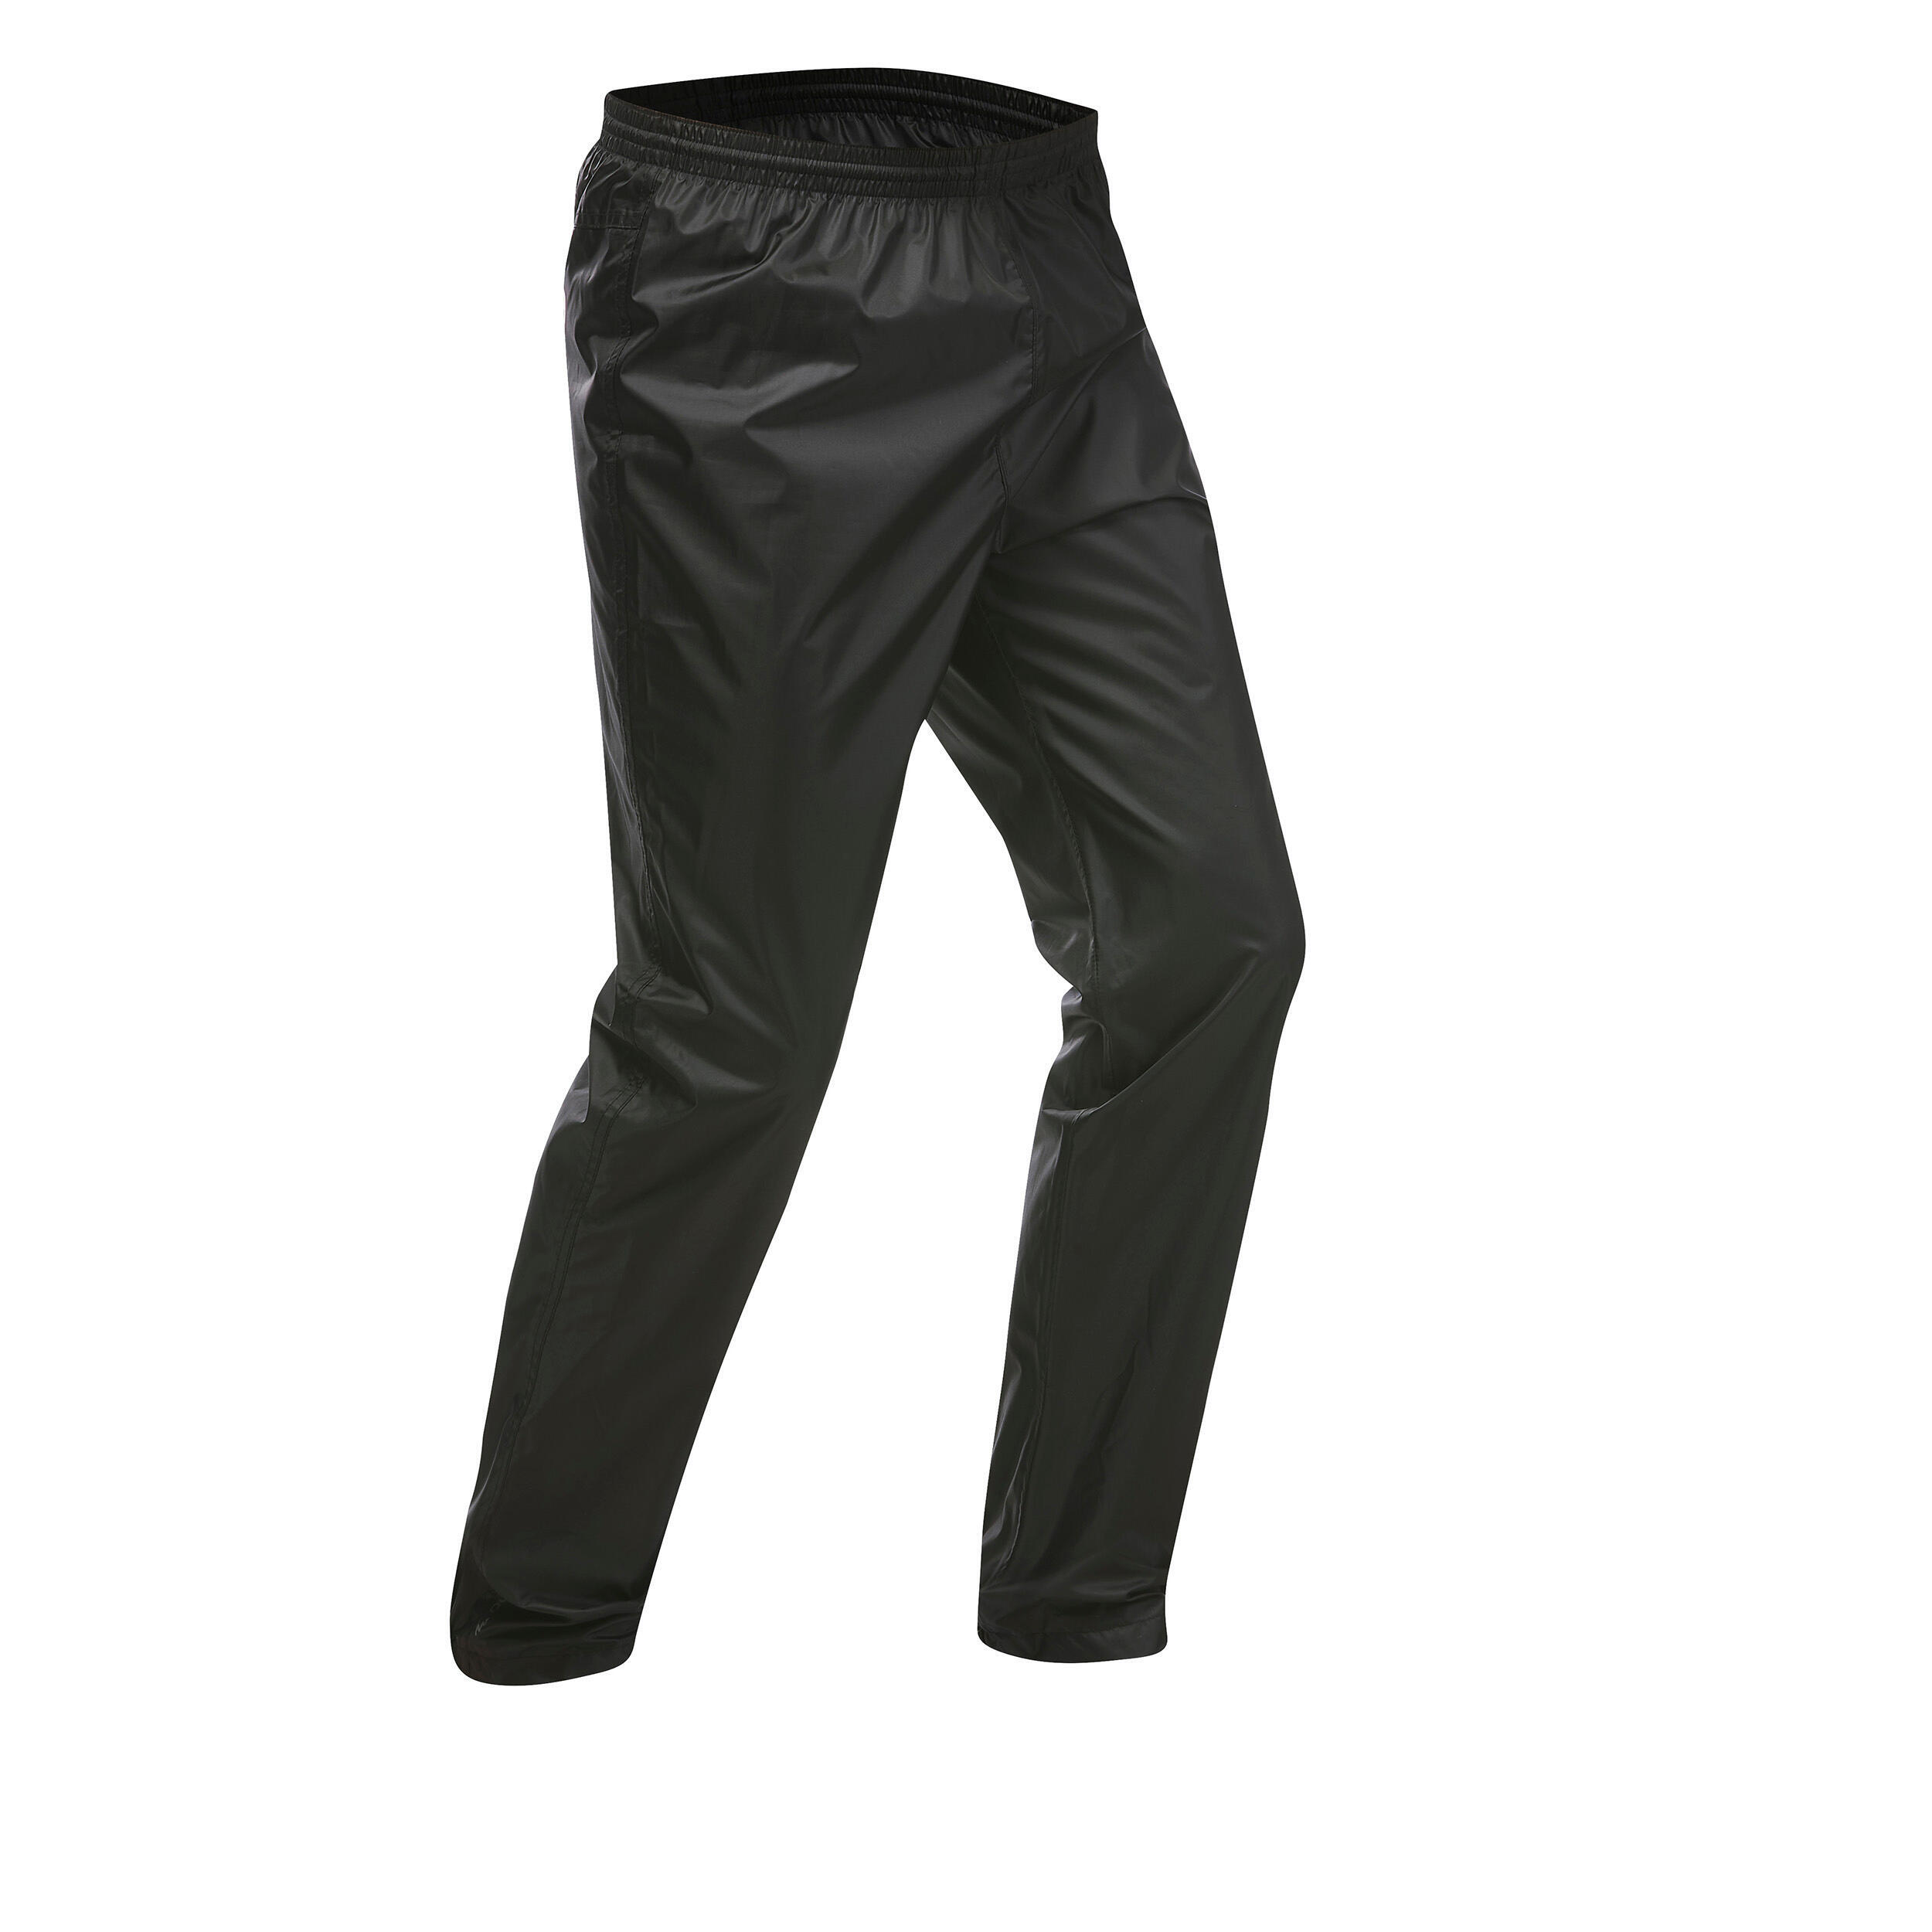 Men's Waterproof Hiking Over Trousers - NH500 Imper 1/7